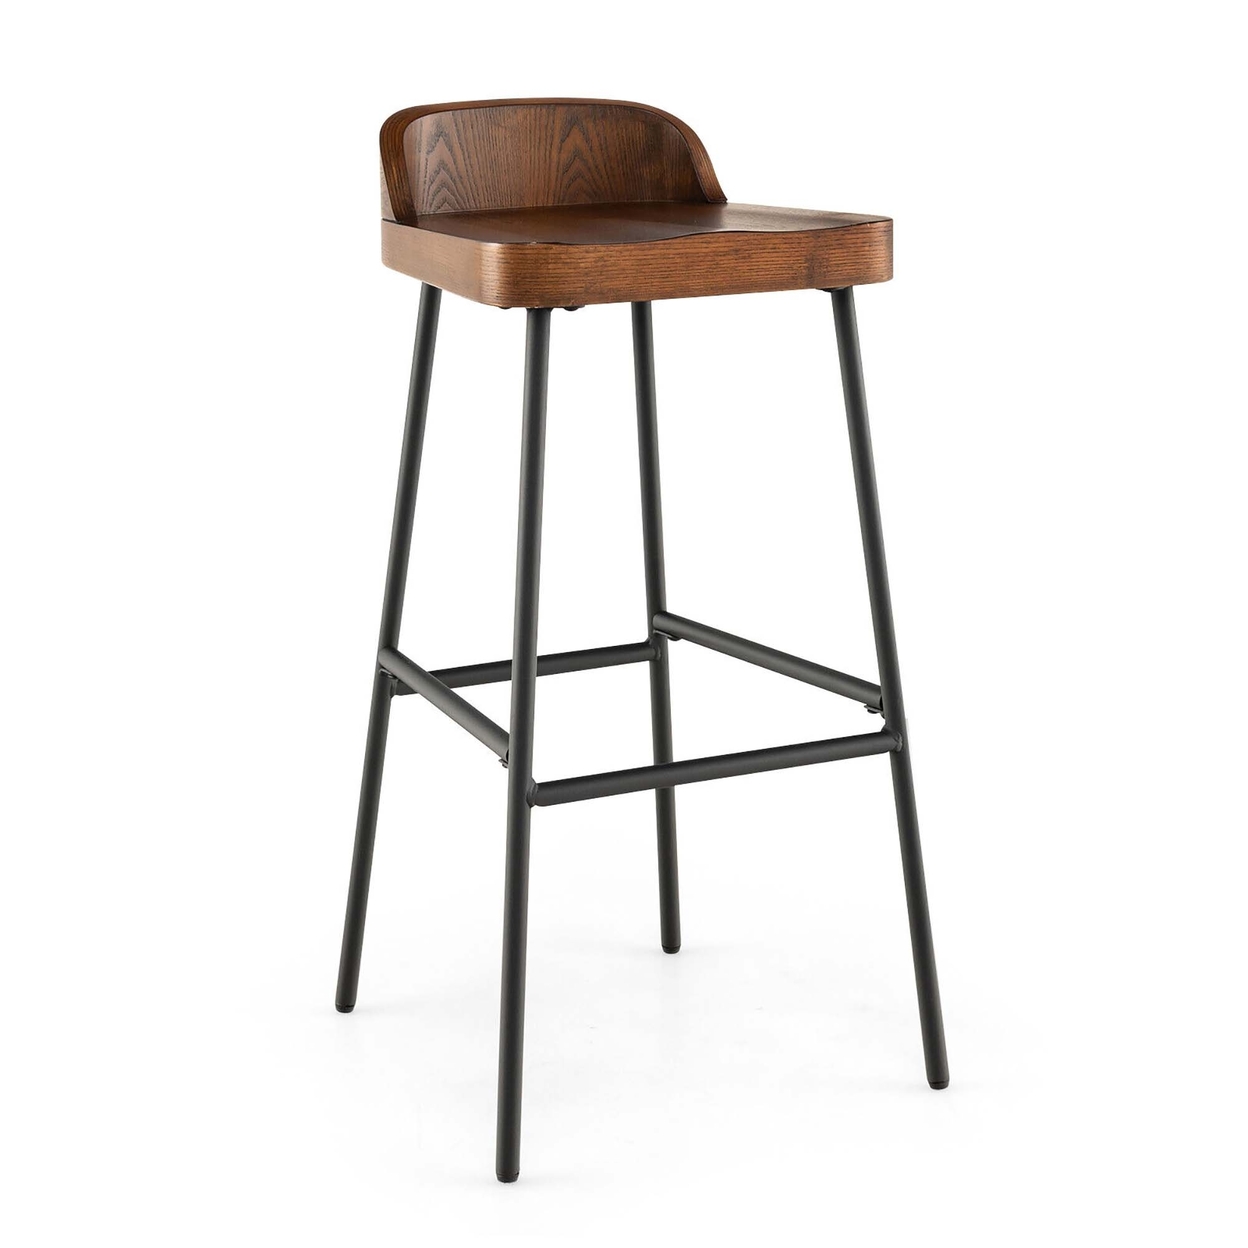 Industrial 29'' Bar Stool Bar Height Saddle Seat Kitchen Stool W/ Low Back